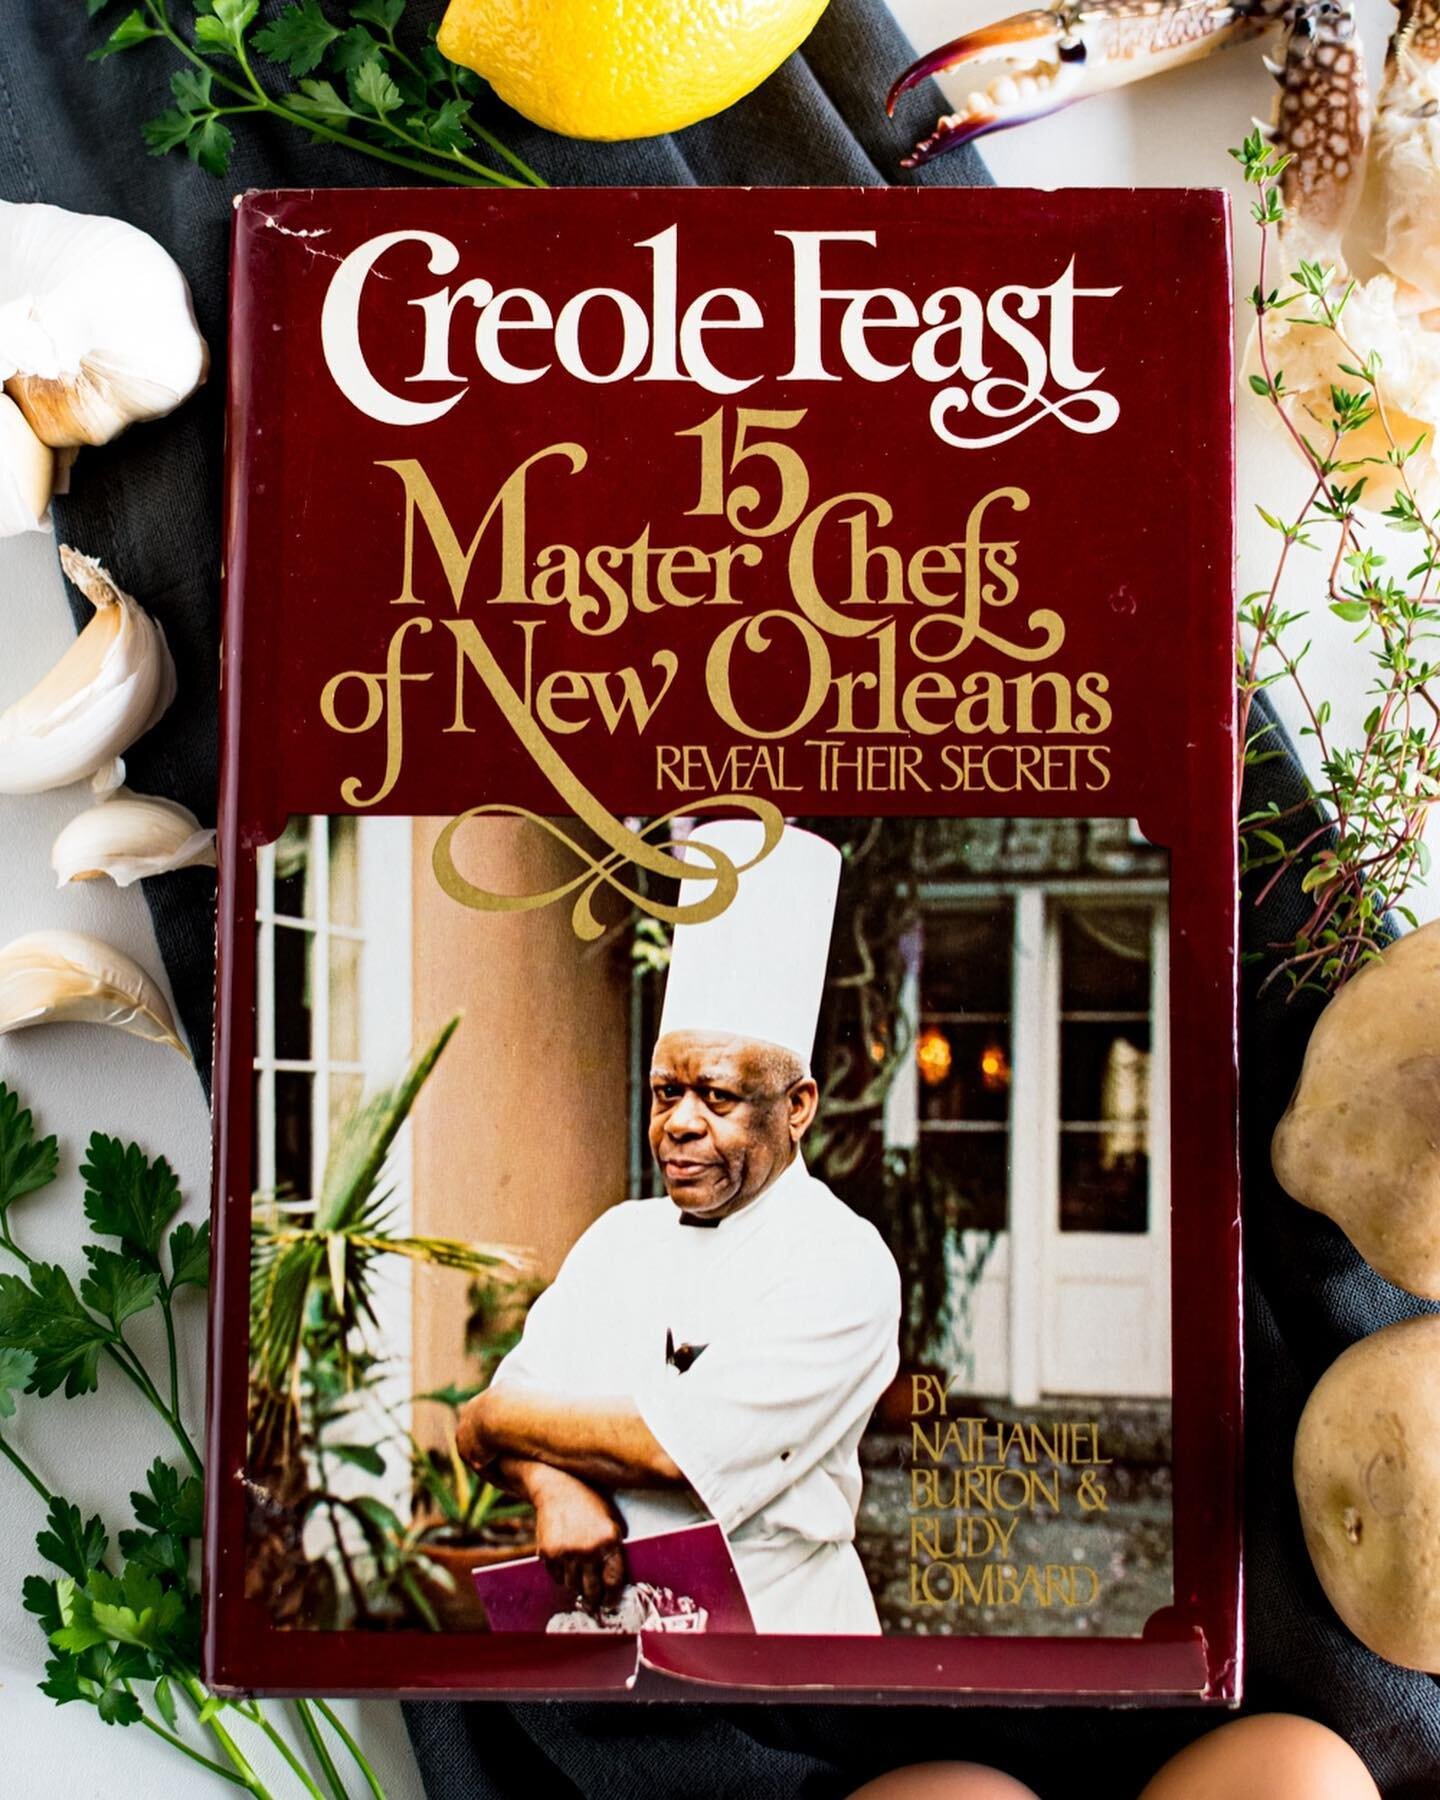 Welcome to the second book in the Culinary Cookbook Celebration of Black History! Today I&rsquo;m sharing with you my next pick which is Creole Feast by Chef Nathaniel Burton and New Orleans civil rights activist Dr. Rudy Lombard. On the cover it&rsq